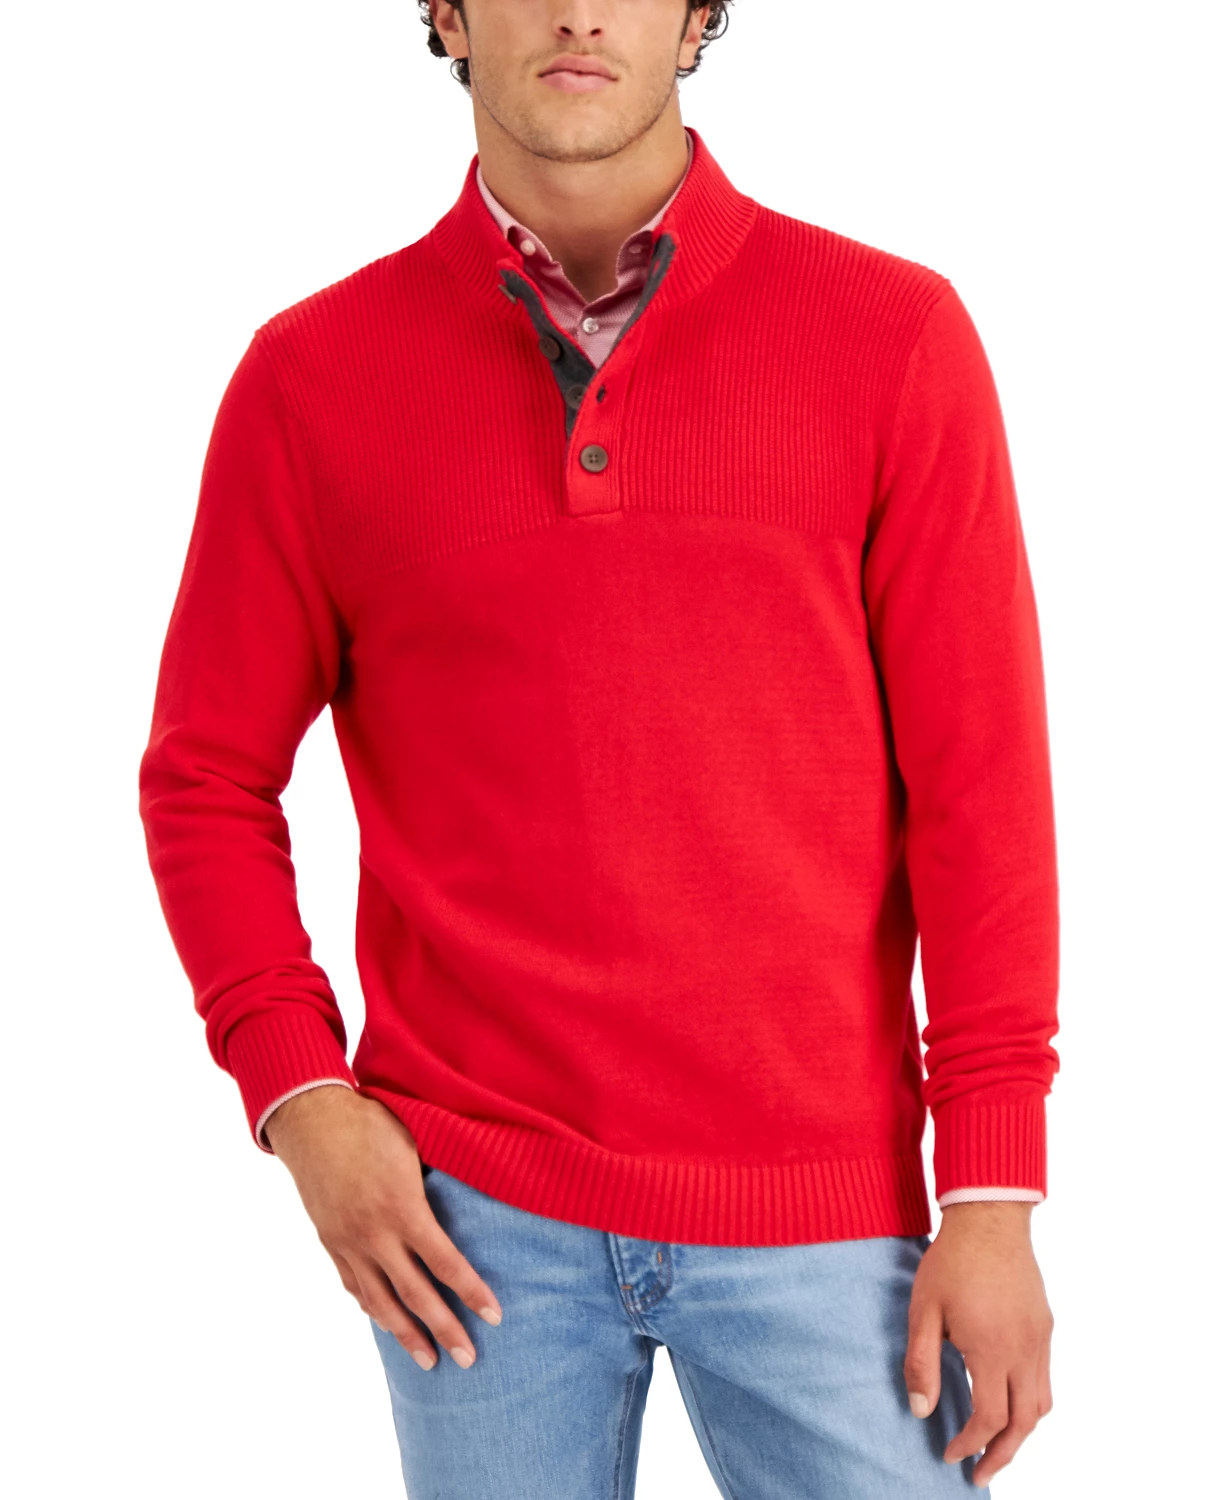 Men’s Ribbed Four-Button Sweater $19.99